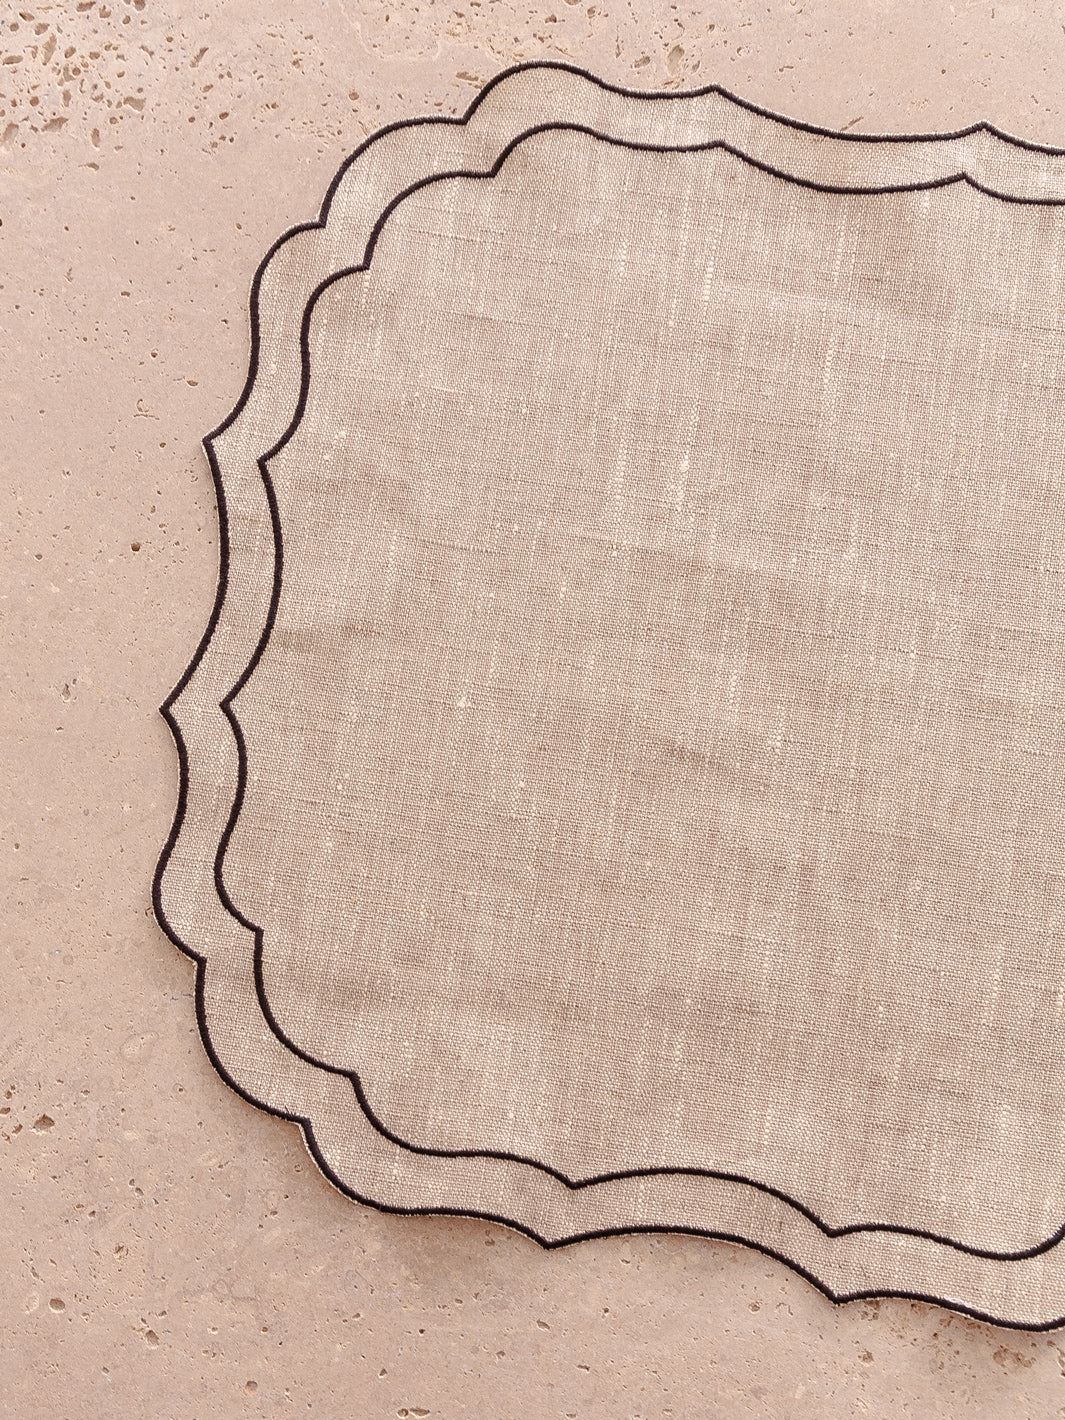 Square Placemat in Natural color waxed linen